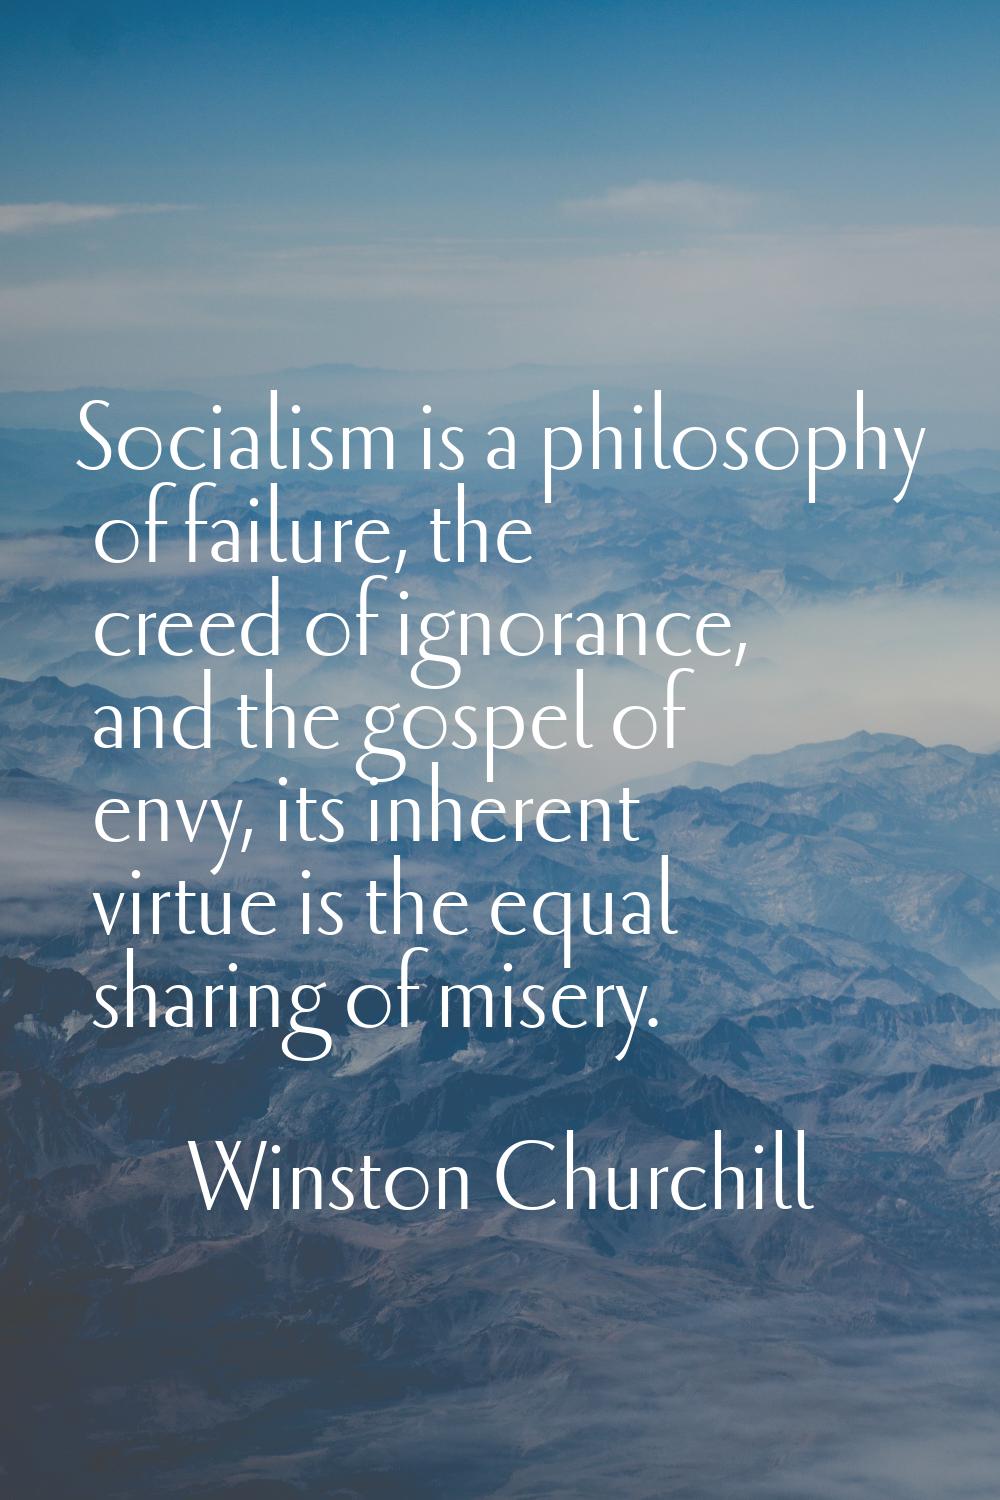 Socialism is a philosophy of failure, the creed of ignorance, and the gospel of envy, its inherent 